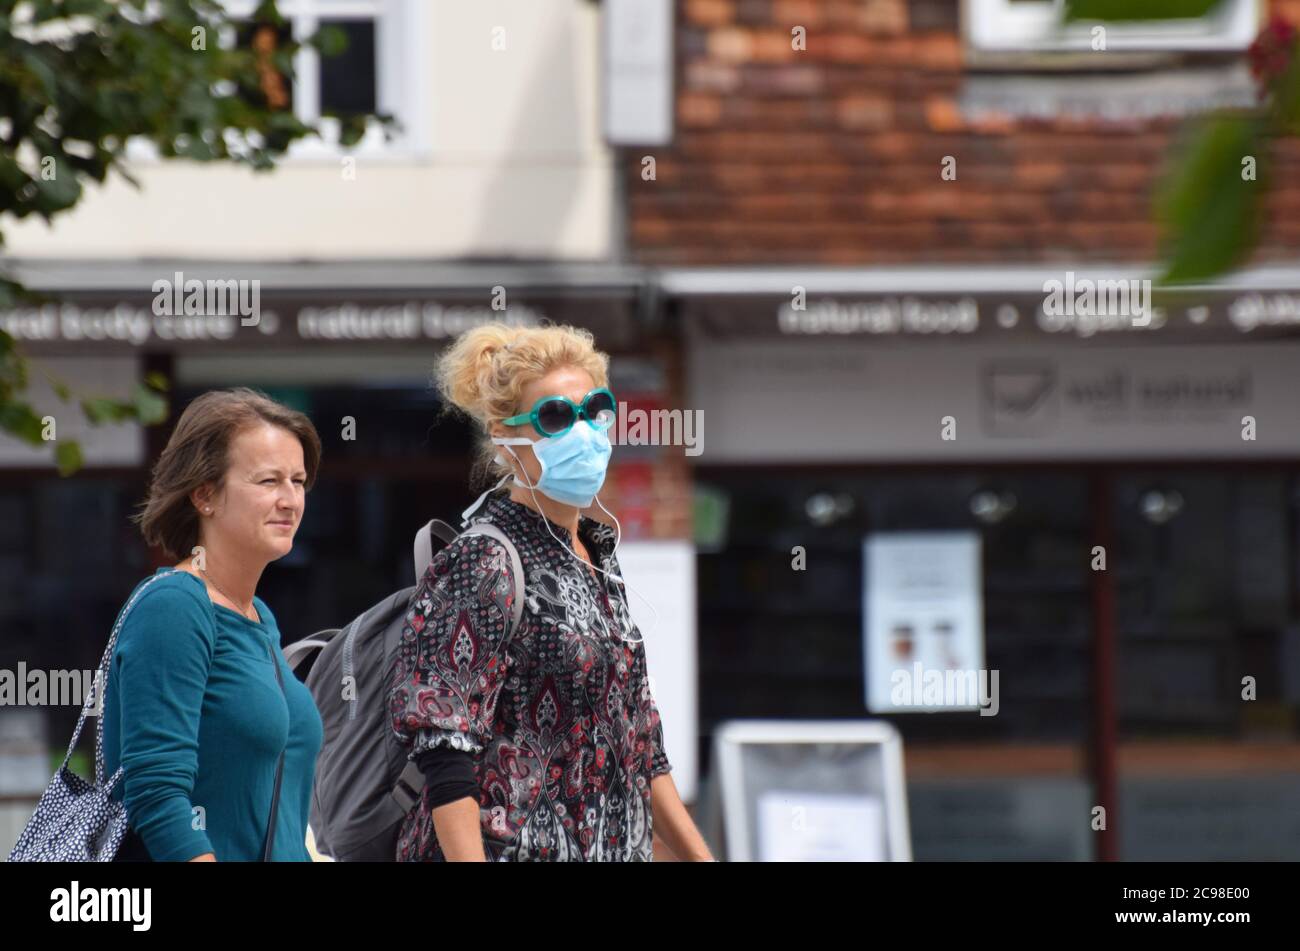 A mother and daughter out shopping in a British Town during the Covid 19 pandemic - he daughter wears a face mask Stock Photo